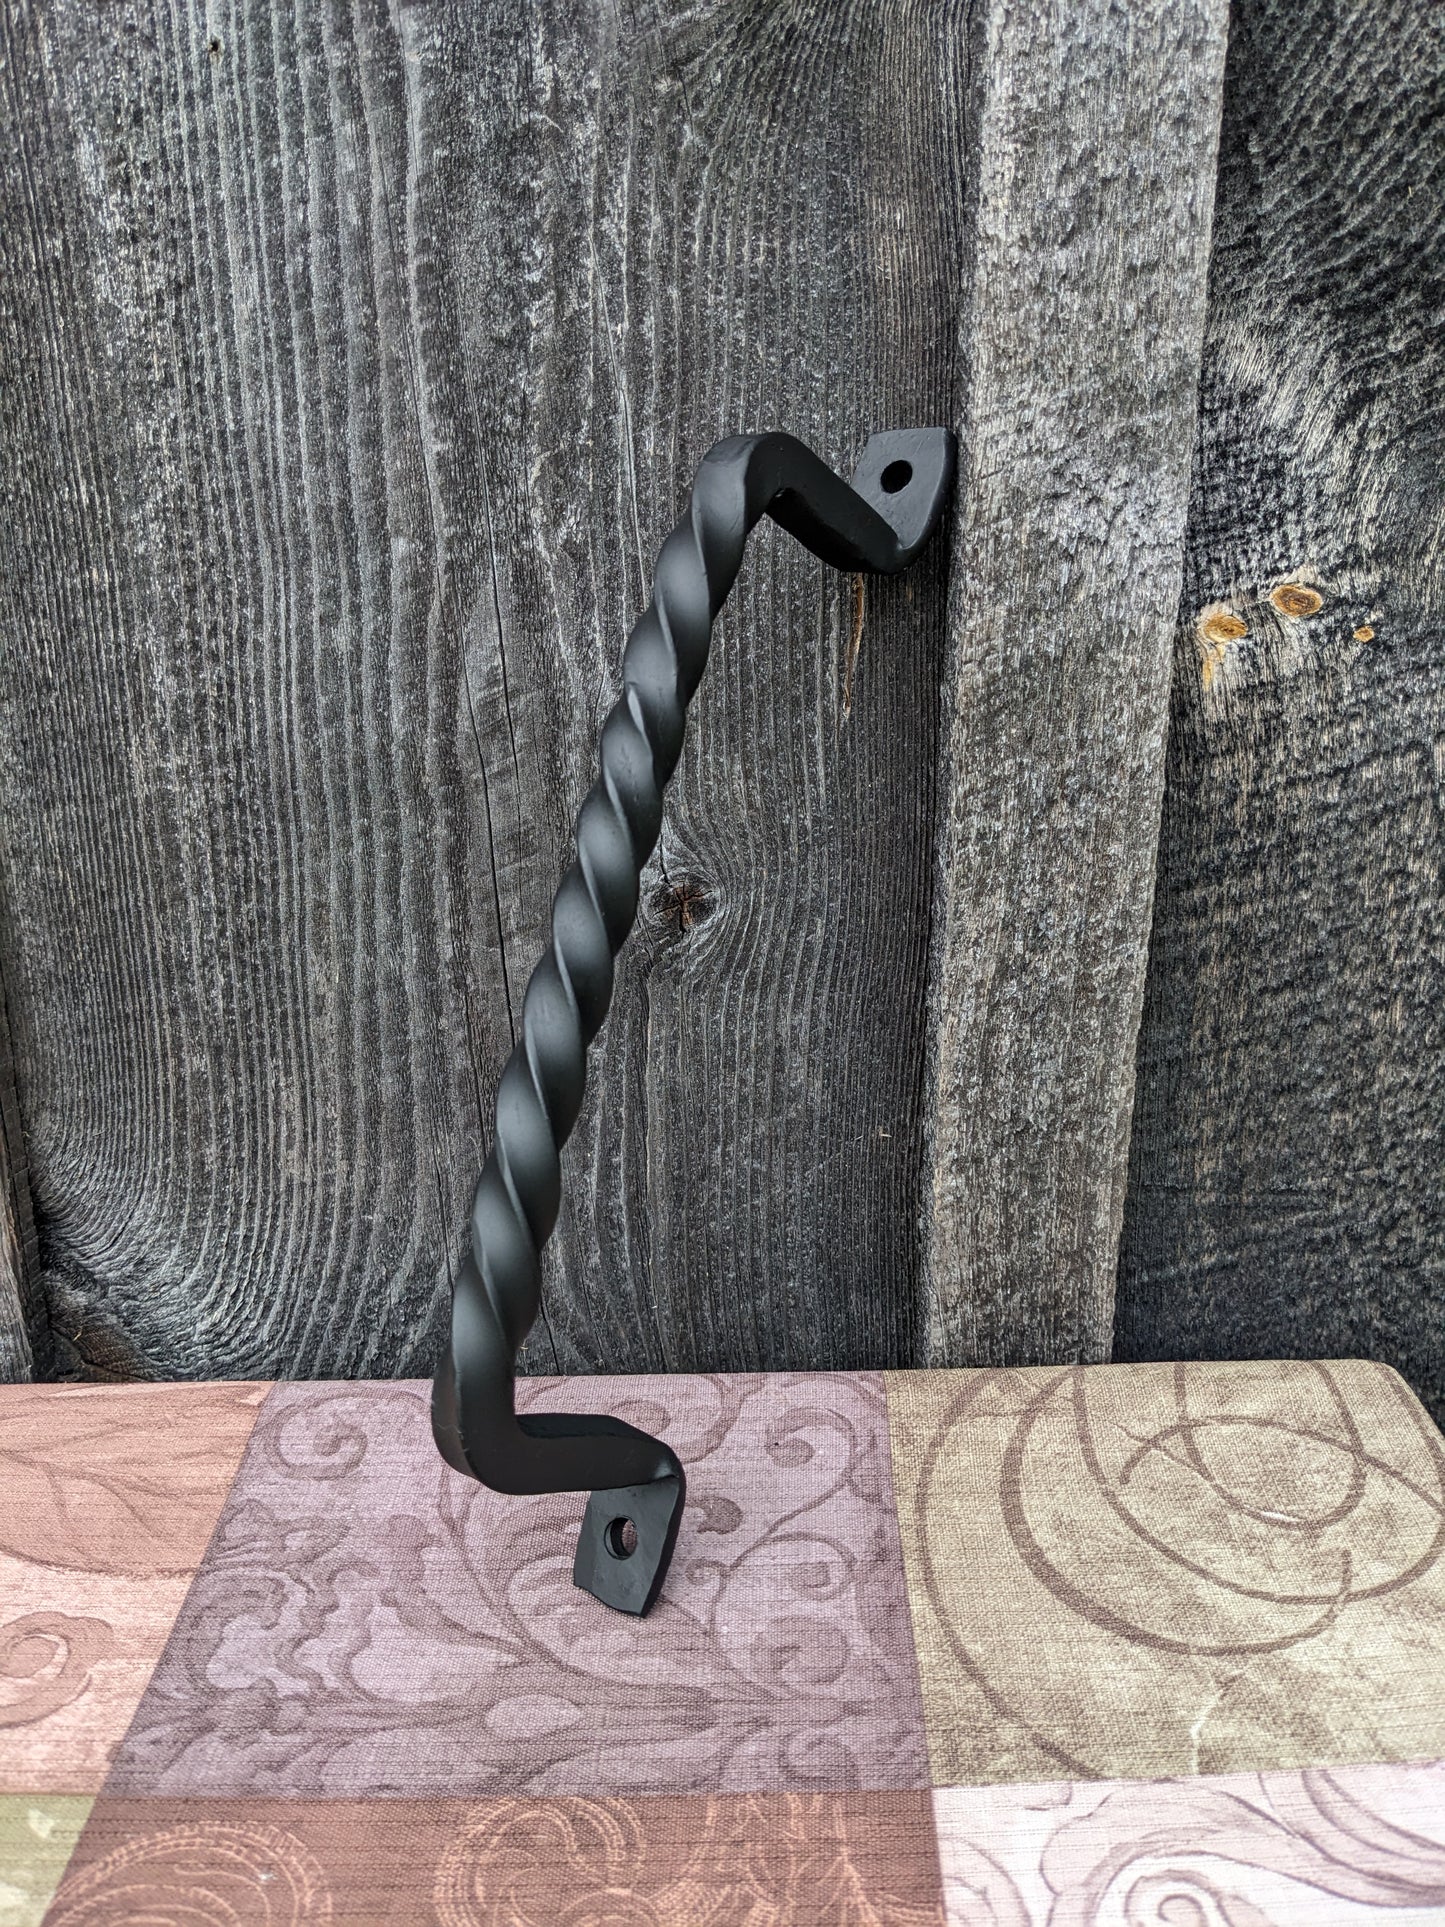 Hand Forged twisted handle with one end sitting on a table with a colorful tablecloth, the other side leaning against a barn wood wall.